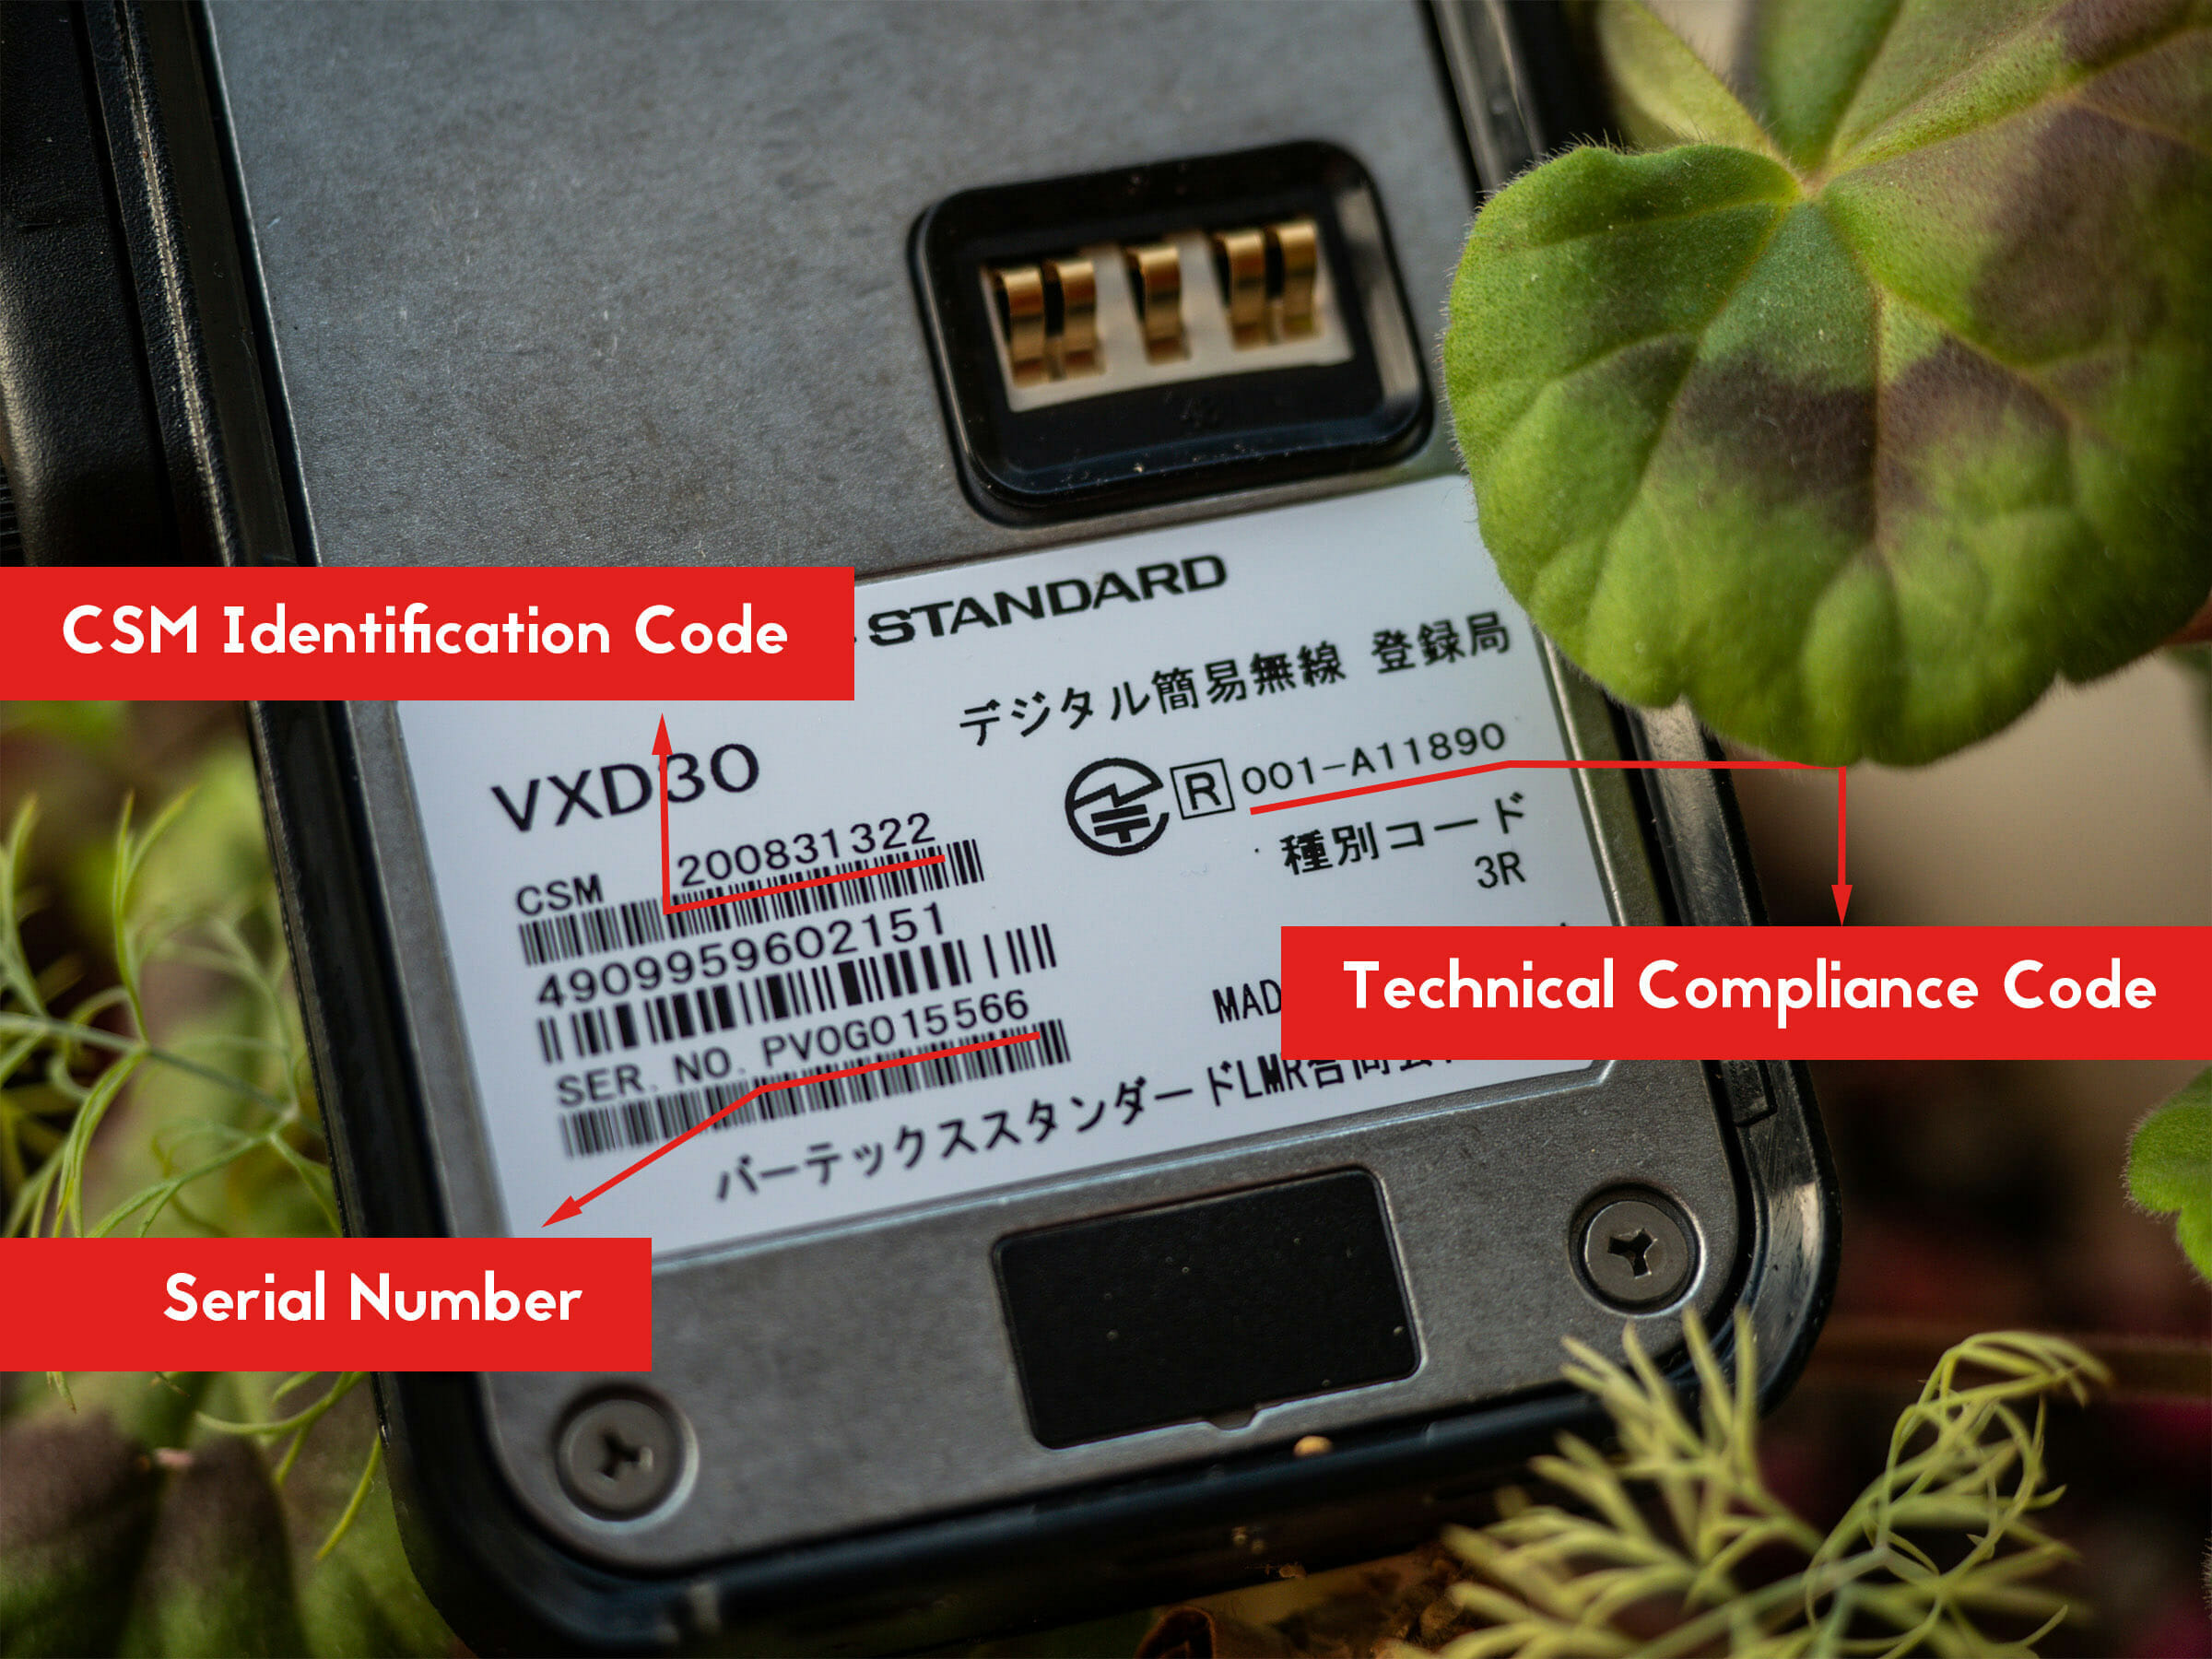 Required serial numbers, CSM numbers and technical compliance codes for registering your digital kan-i two-way radio walkie-talkie in Japan in English